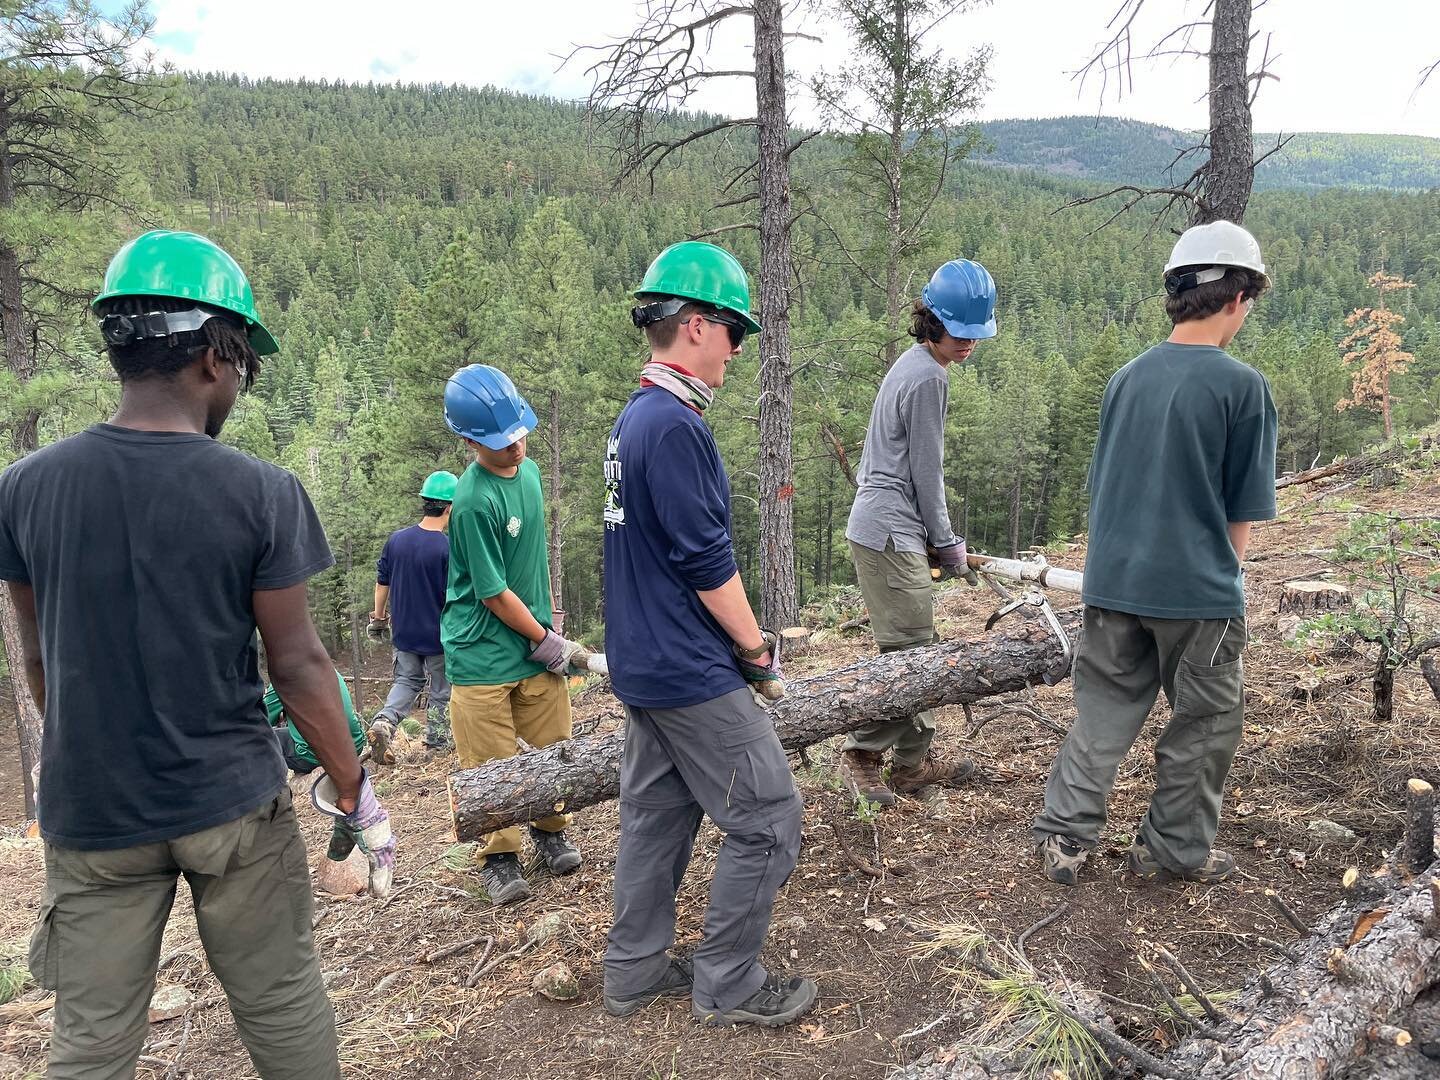 Troop 1 Altadena Philmont crew 710-7E working on a conservation project at Miner&rsquo;s Park. Clearing the area to help control the next fire. We were proud to participate. #philmontscoutranch #troop1altadena #minerspark #conservation